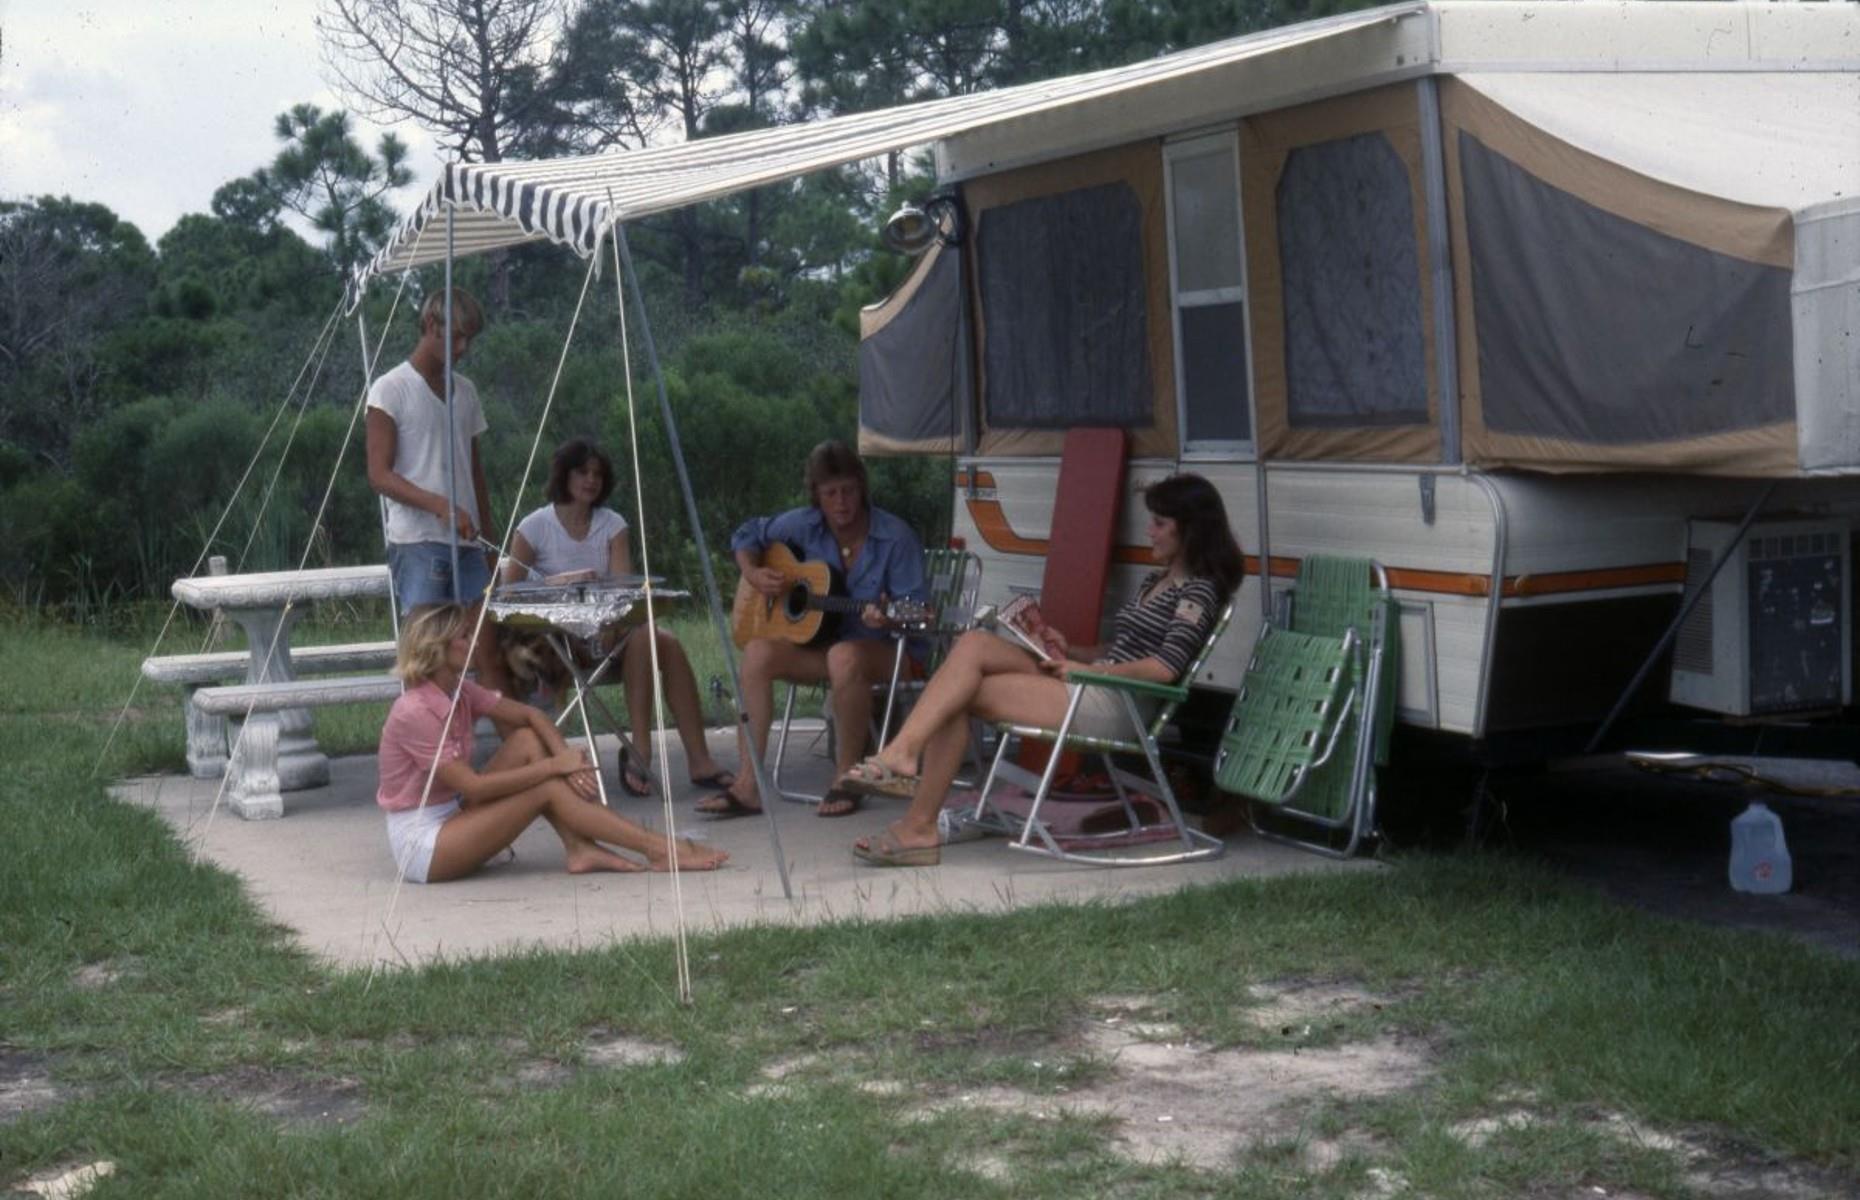 As motorhome and RV ownership grew, so did the need for more sites in which to park up. The successful management of public land, such as national parks and state parks, also helped to fuel camping’s popularity in this time. Seen here, a group of campers sit around by their trailer.